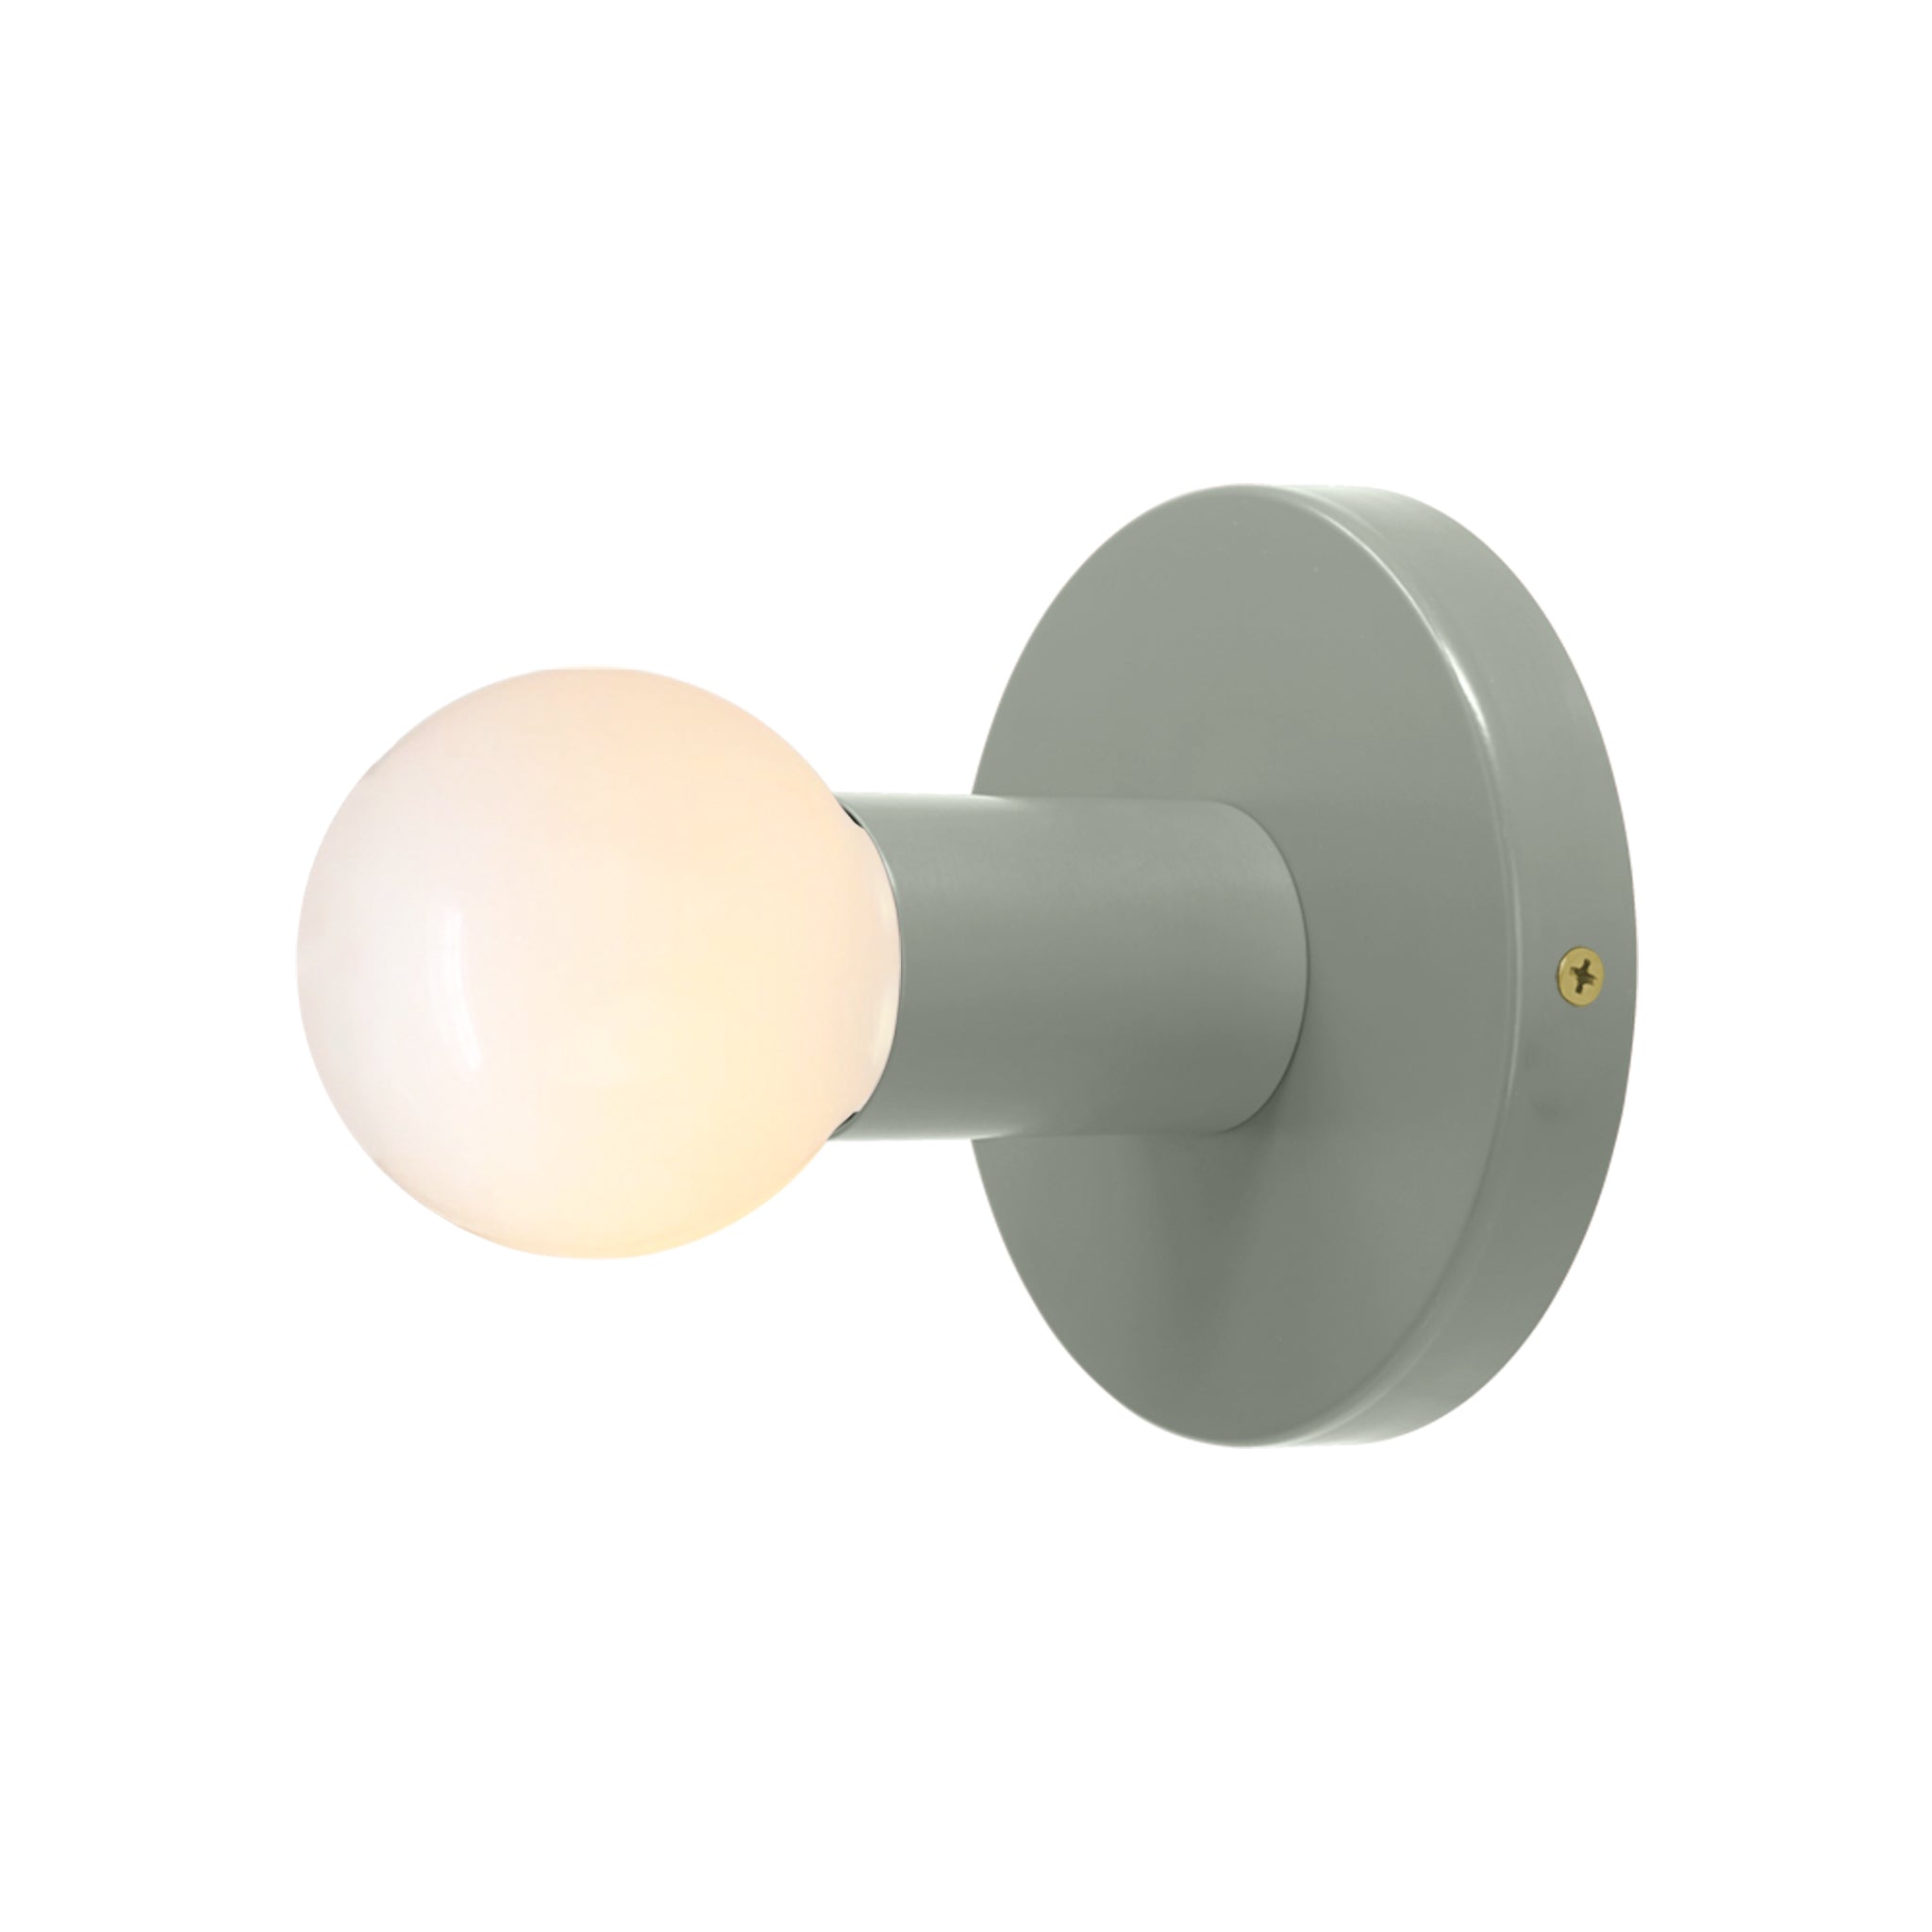 Brass and spa color Twink sconce Dutton Brown lighting